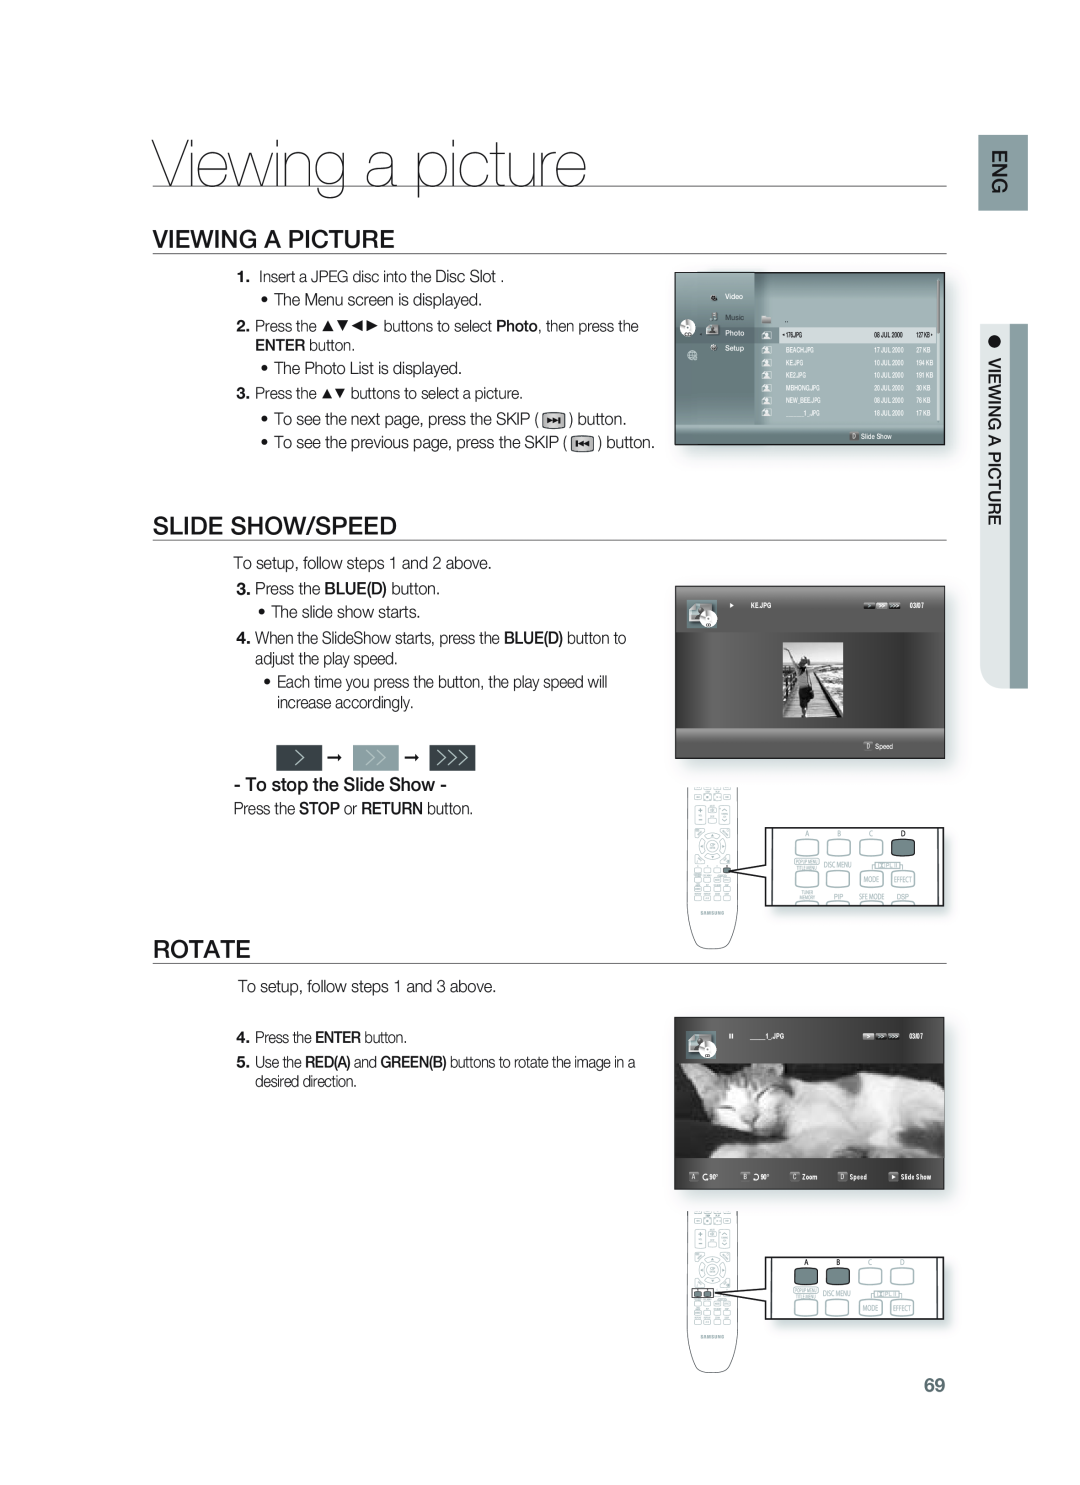 Samsung HT-BD1252, HT-BD1255 user manual Viewing a picture, Viewing A Picture, Slide Show/Speed, Rotate 